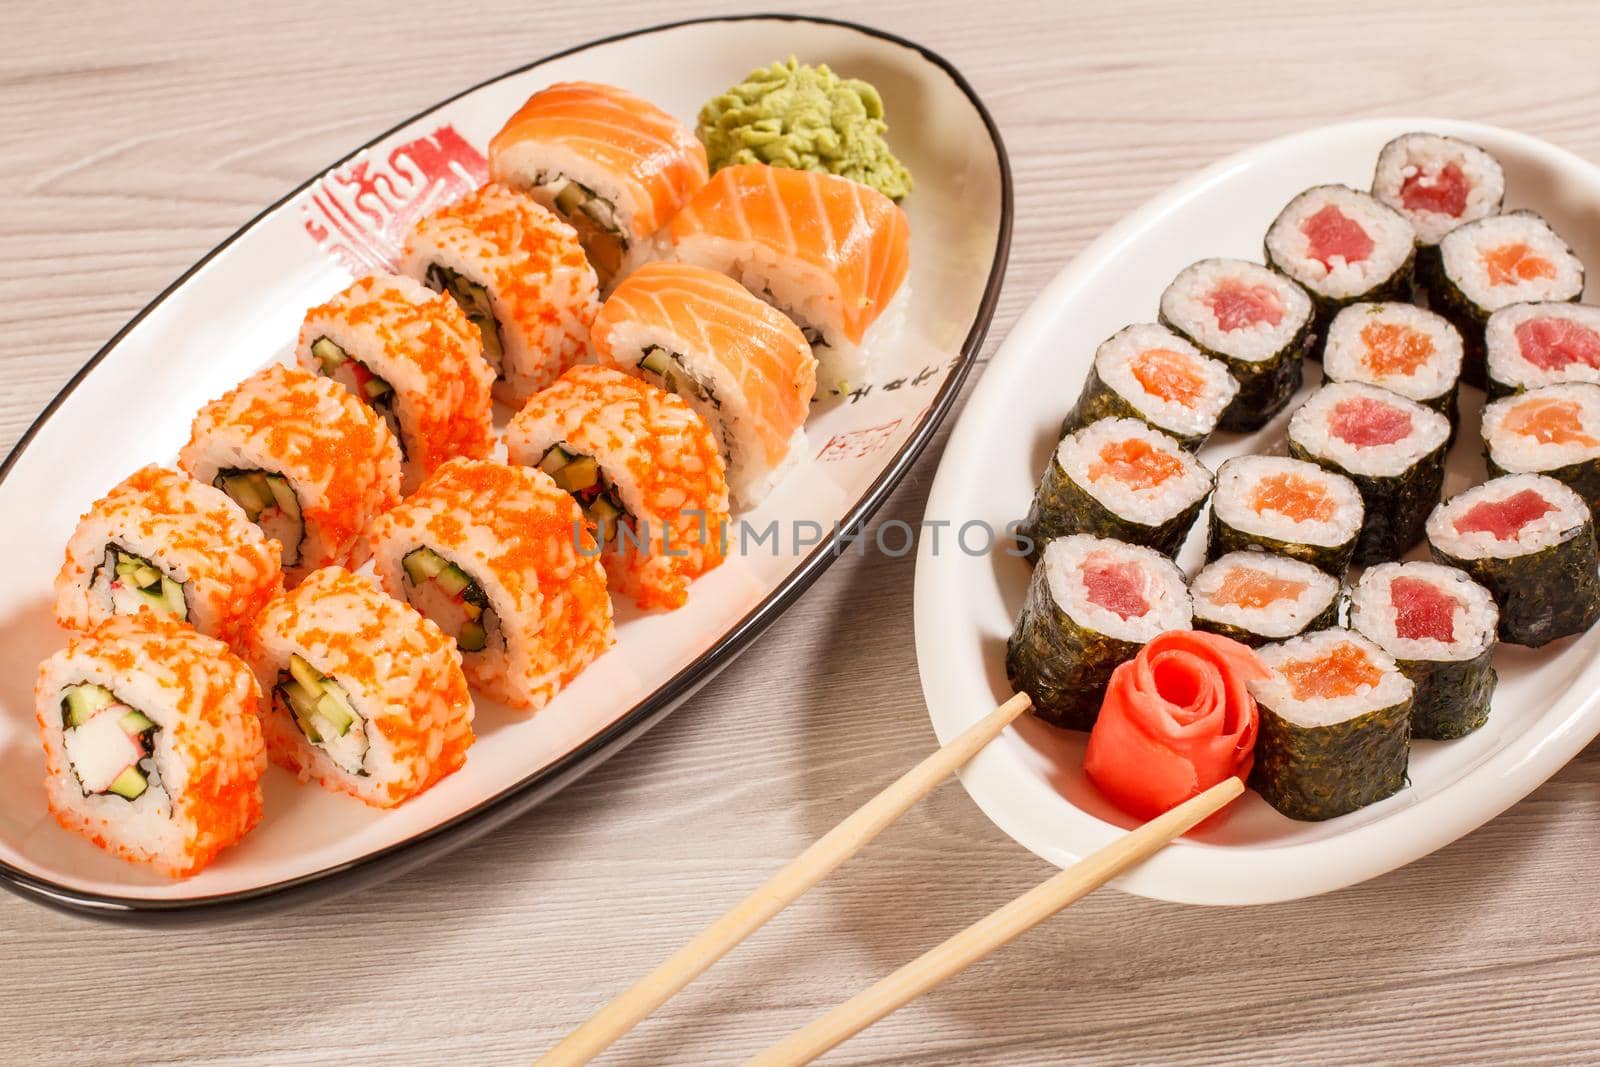 Different sushi rolls with rice, vegetable, seafood on ceramic plates on wooden desk. Top view